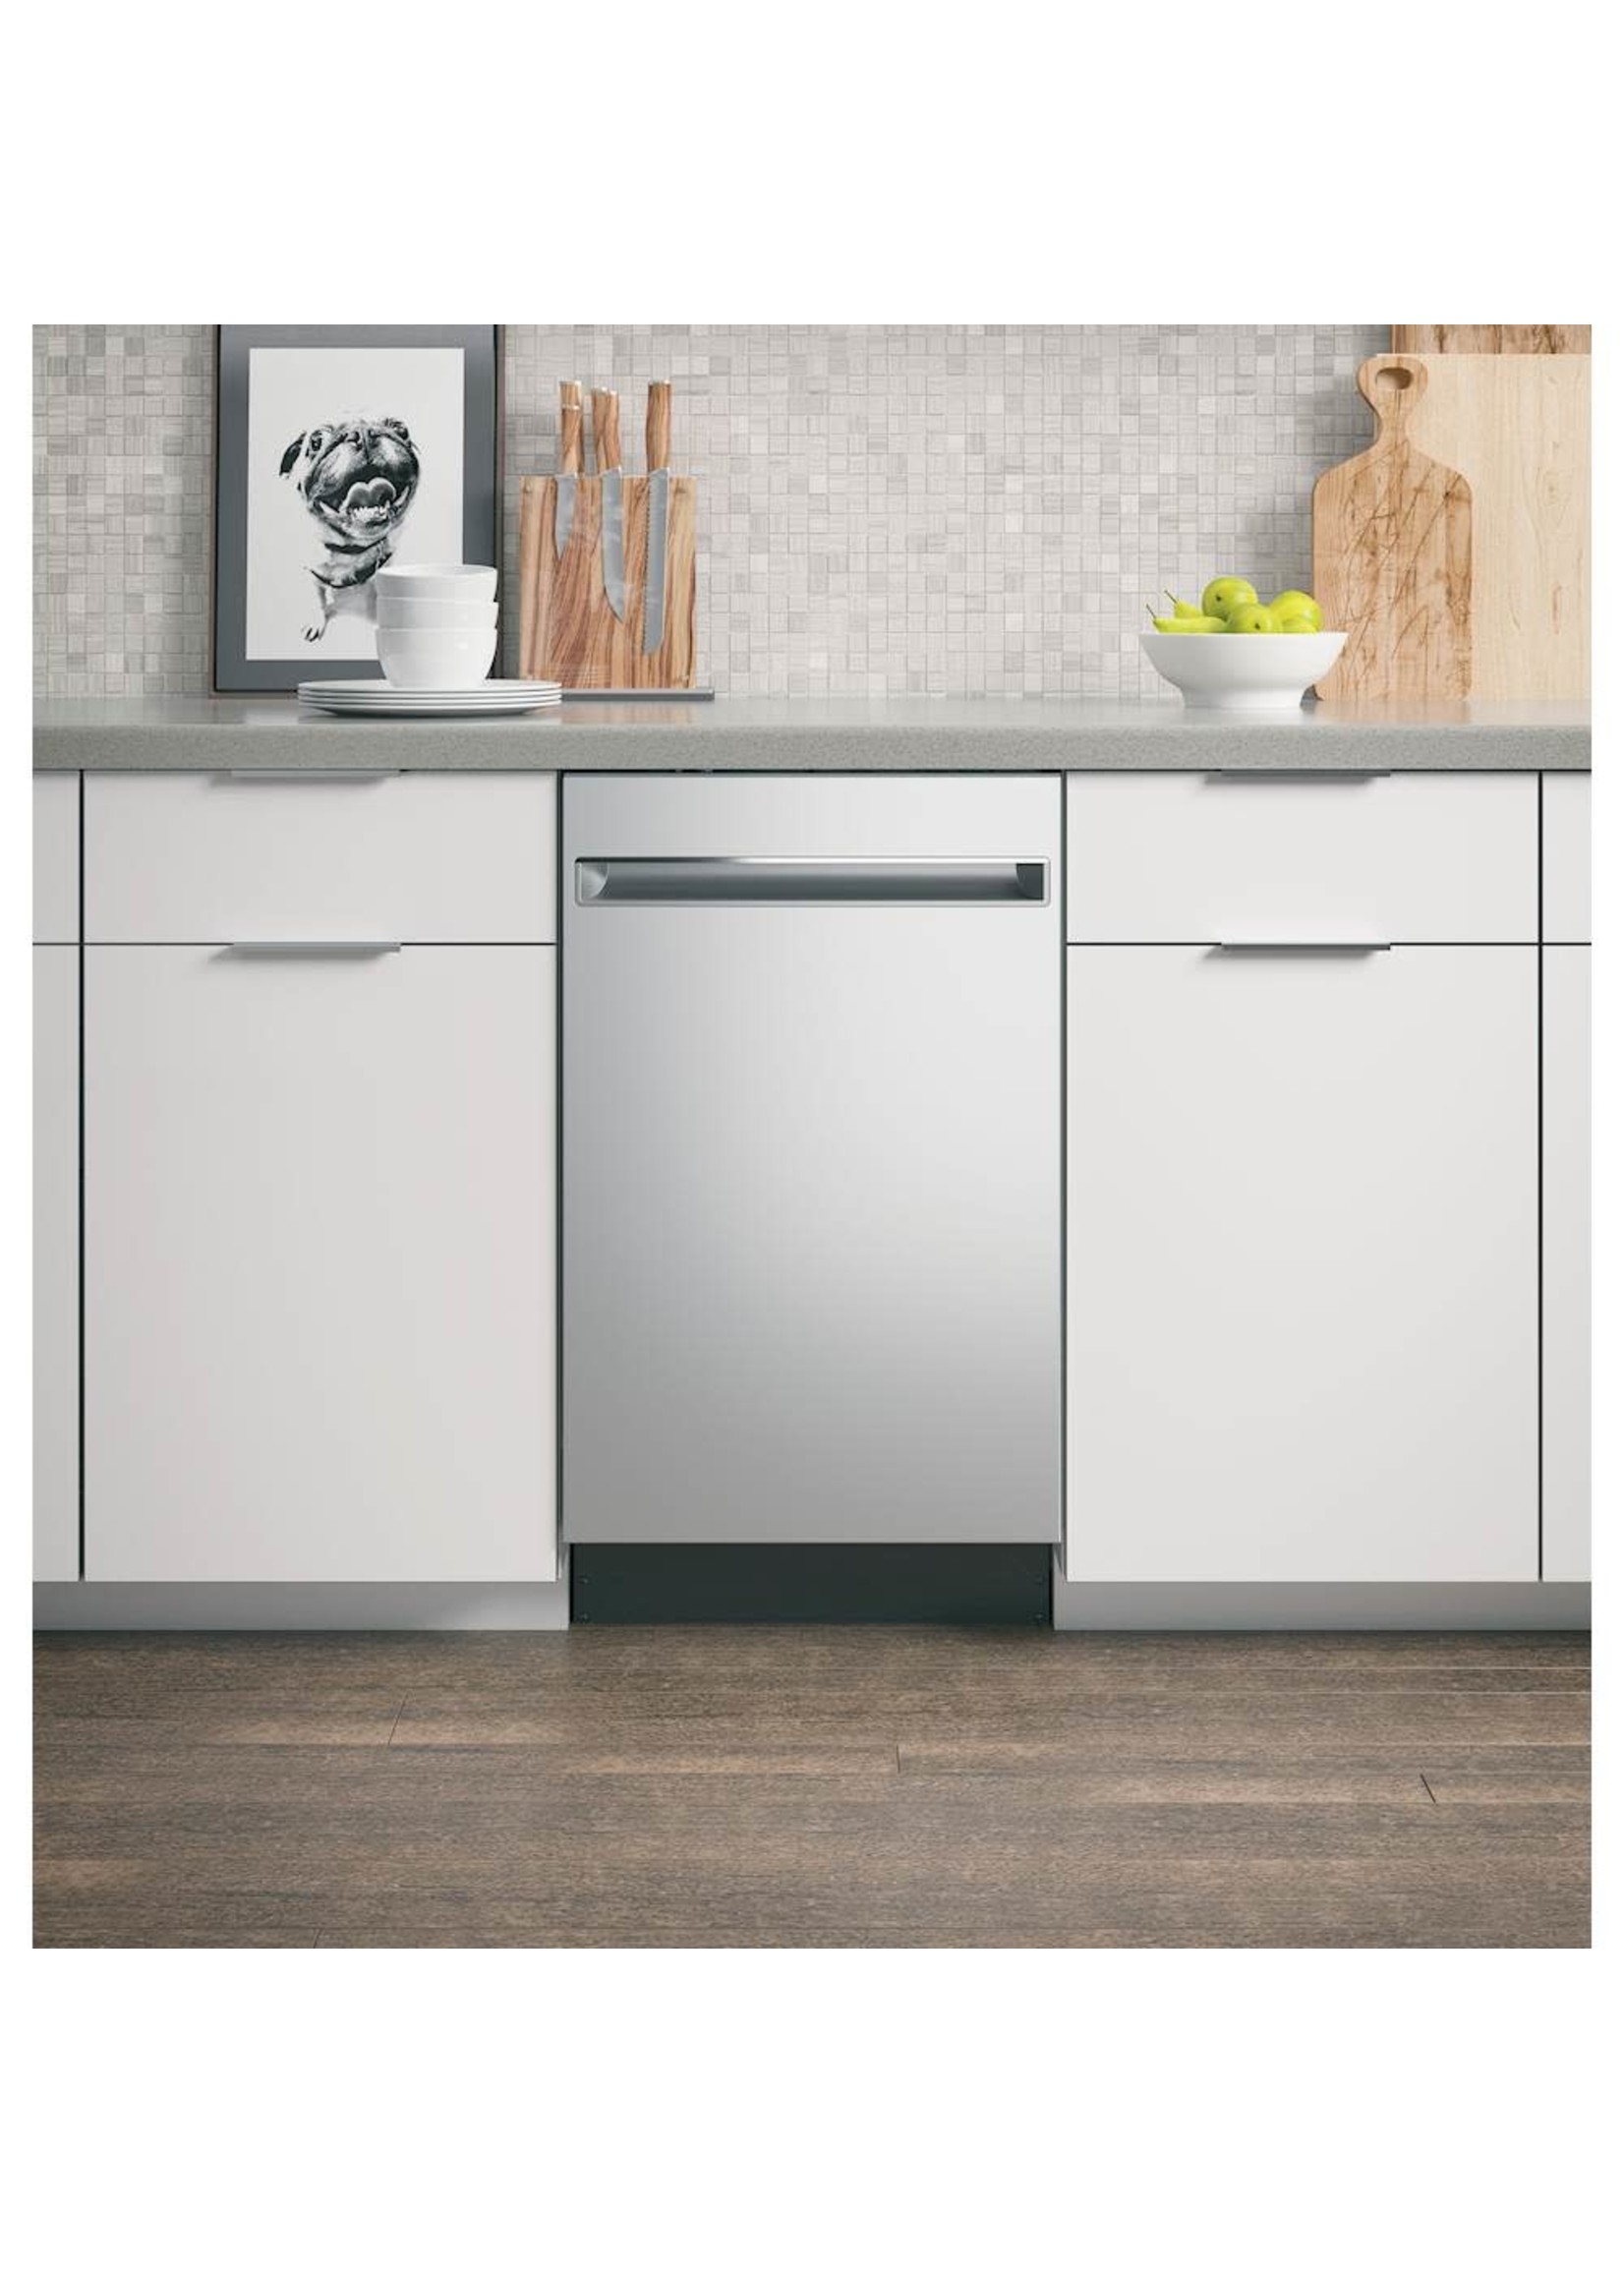 Ge Profile 18" Top Control Built-In Dishwasher with Stainless Steel Tub - Stainless steel